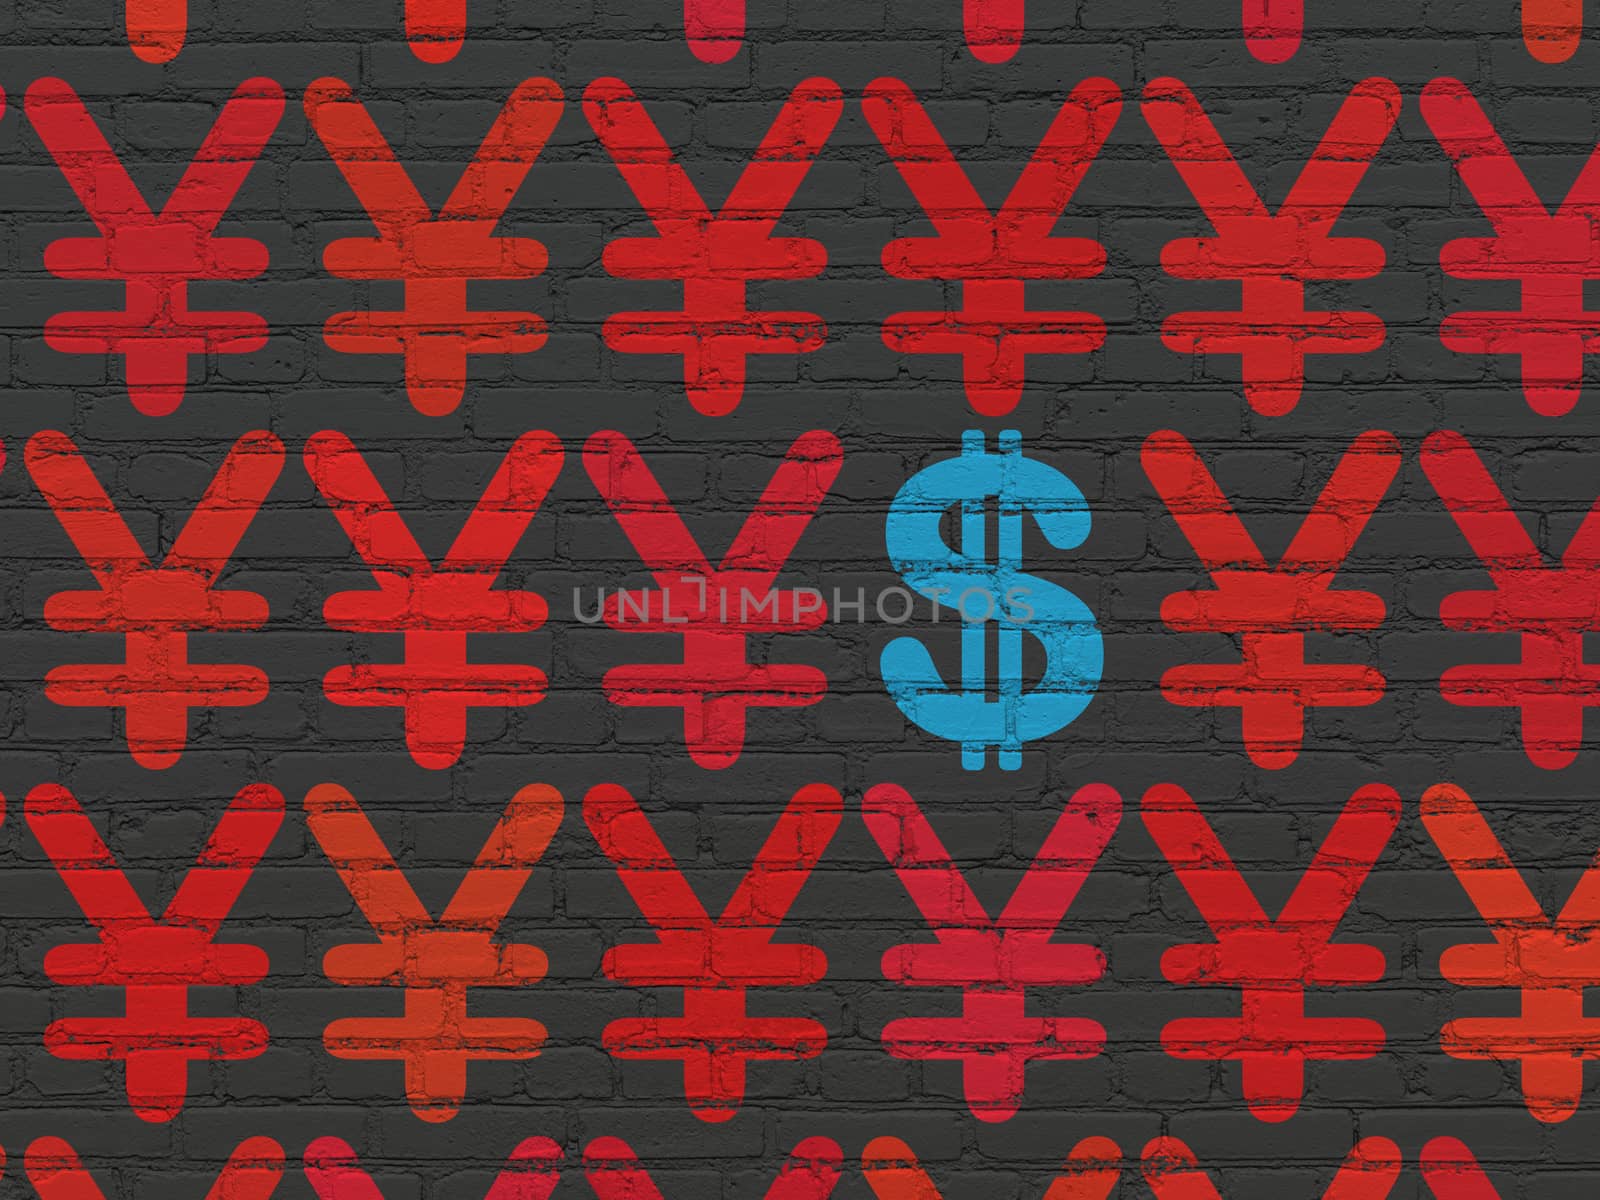 Money concept: rows of Painted red yen icons around blue dollar icon on Black Brick wall background